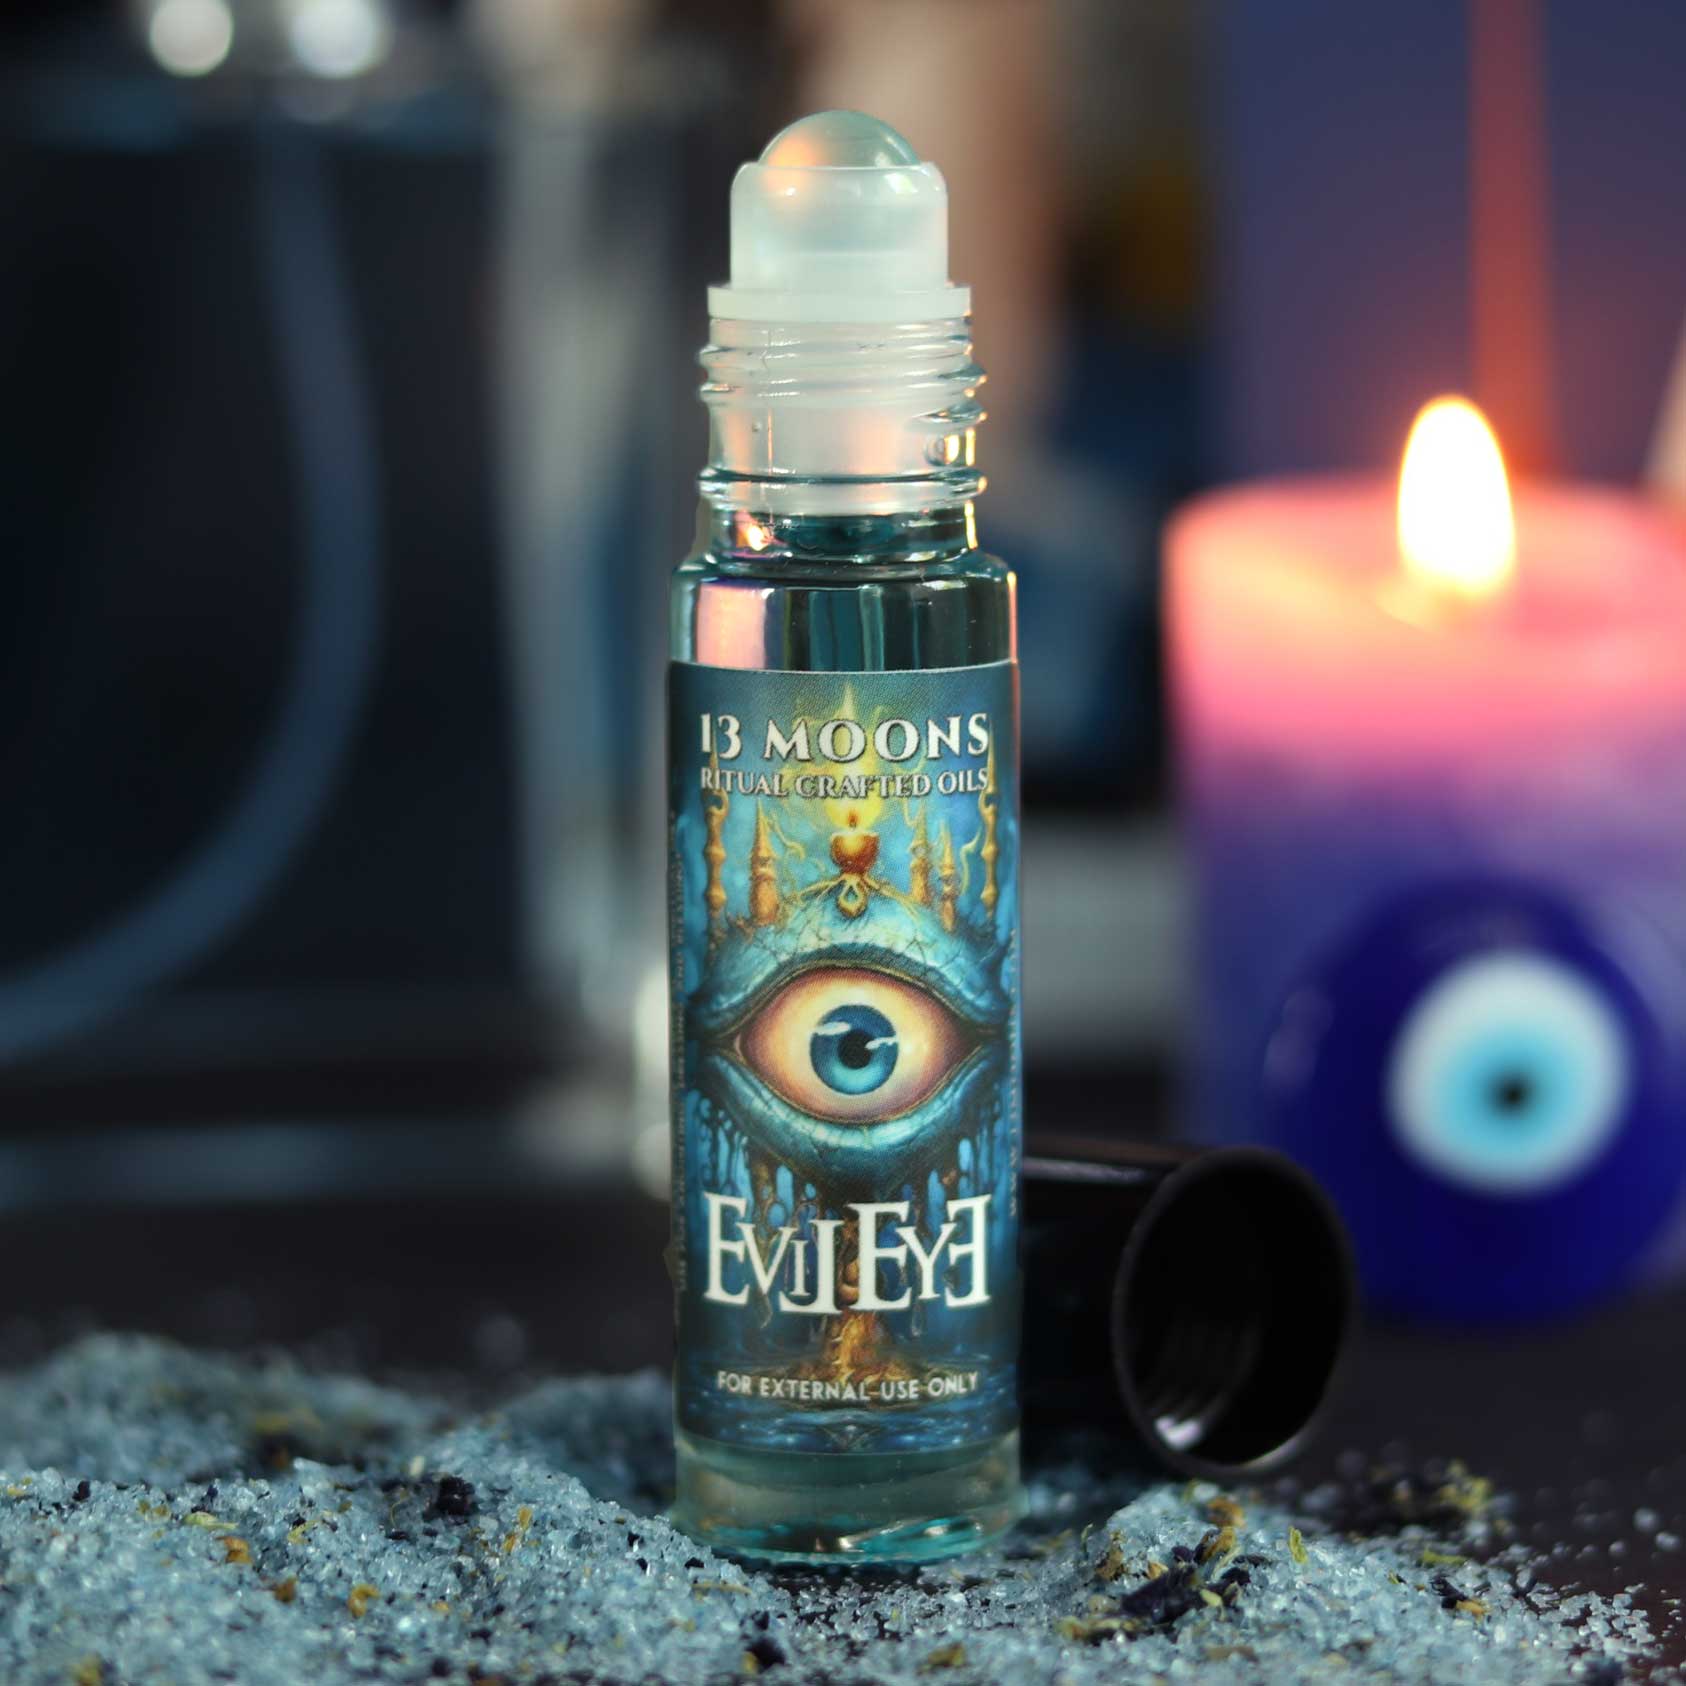 Evil Eye Ritual Crafted Oil by 13 Moons - 13 Moons